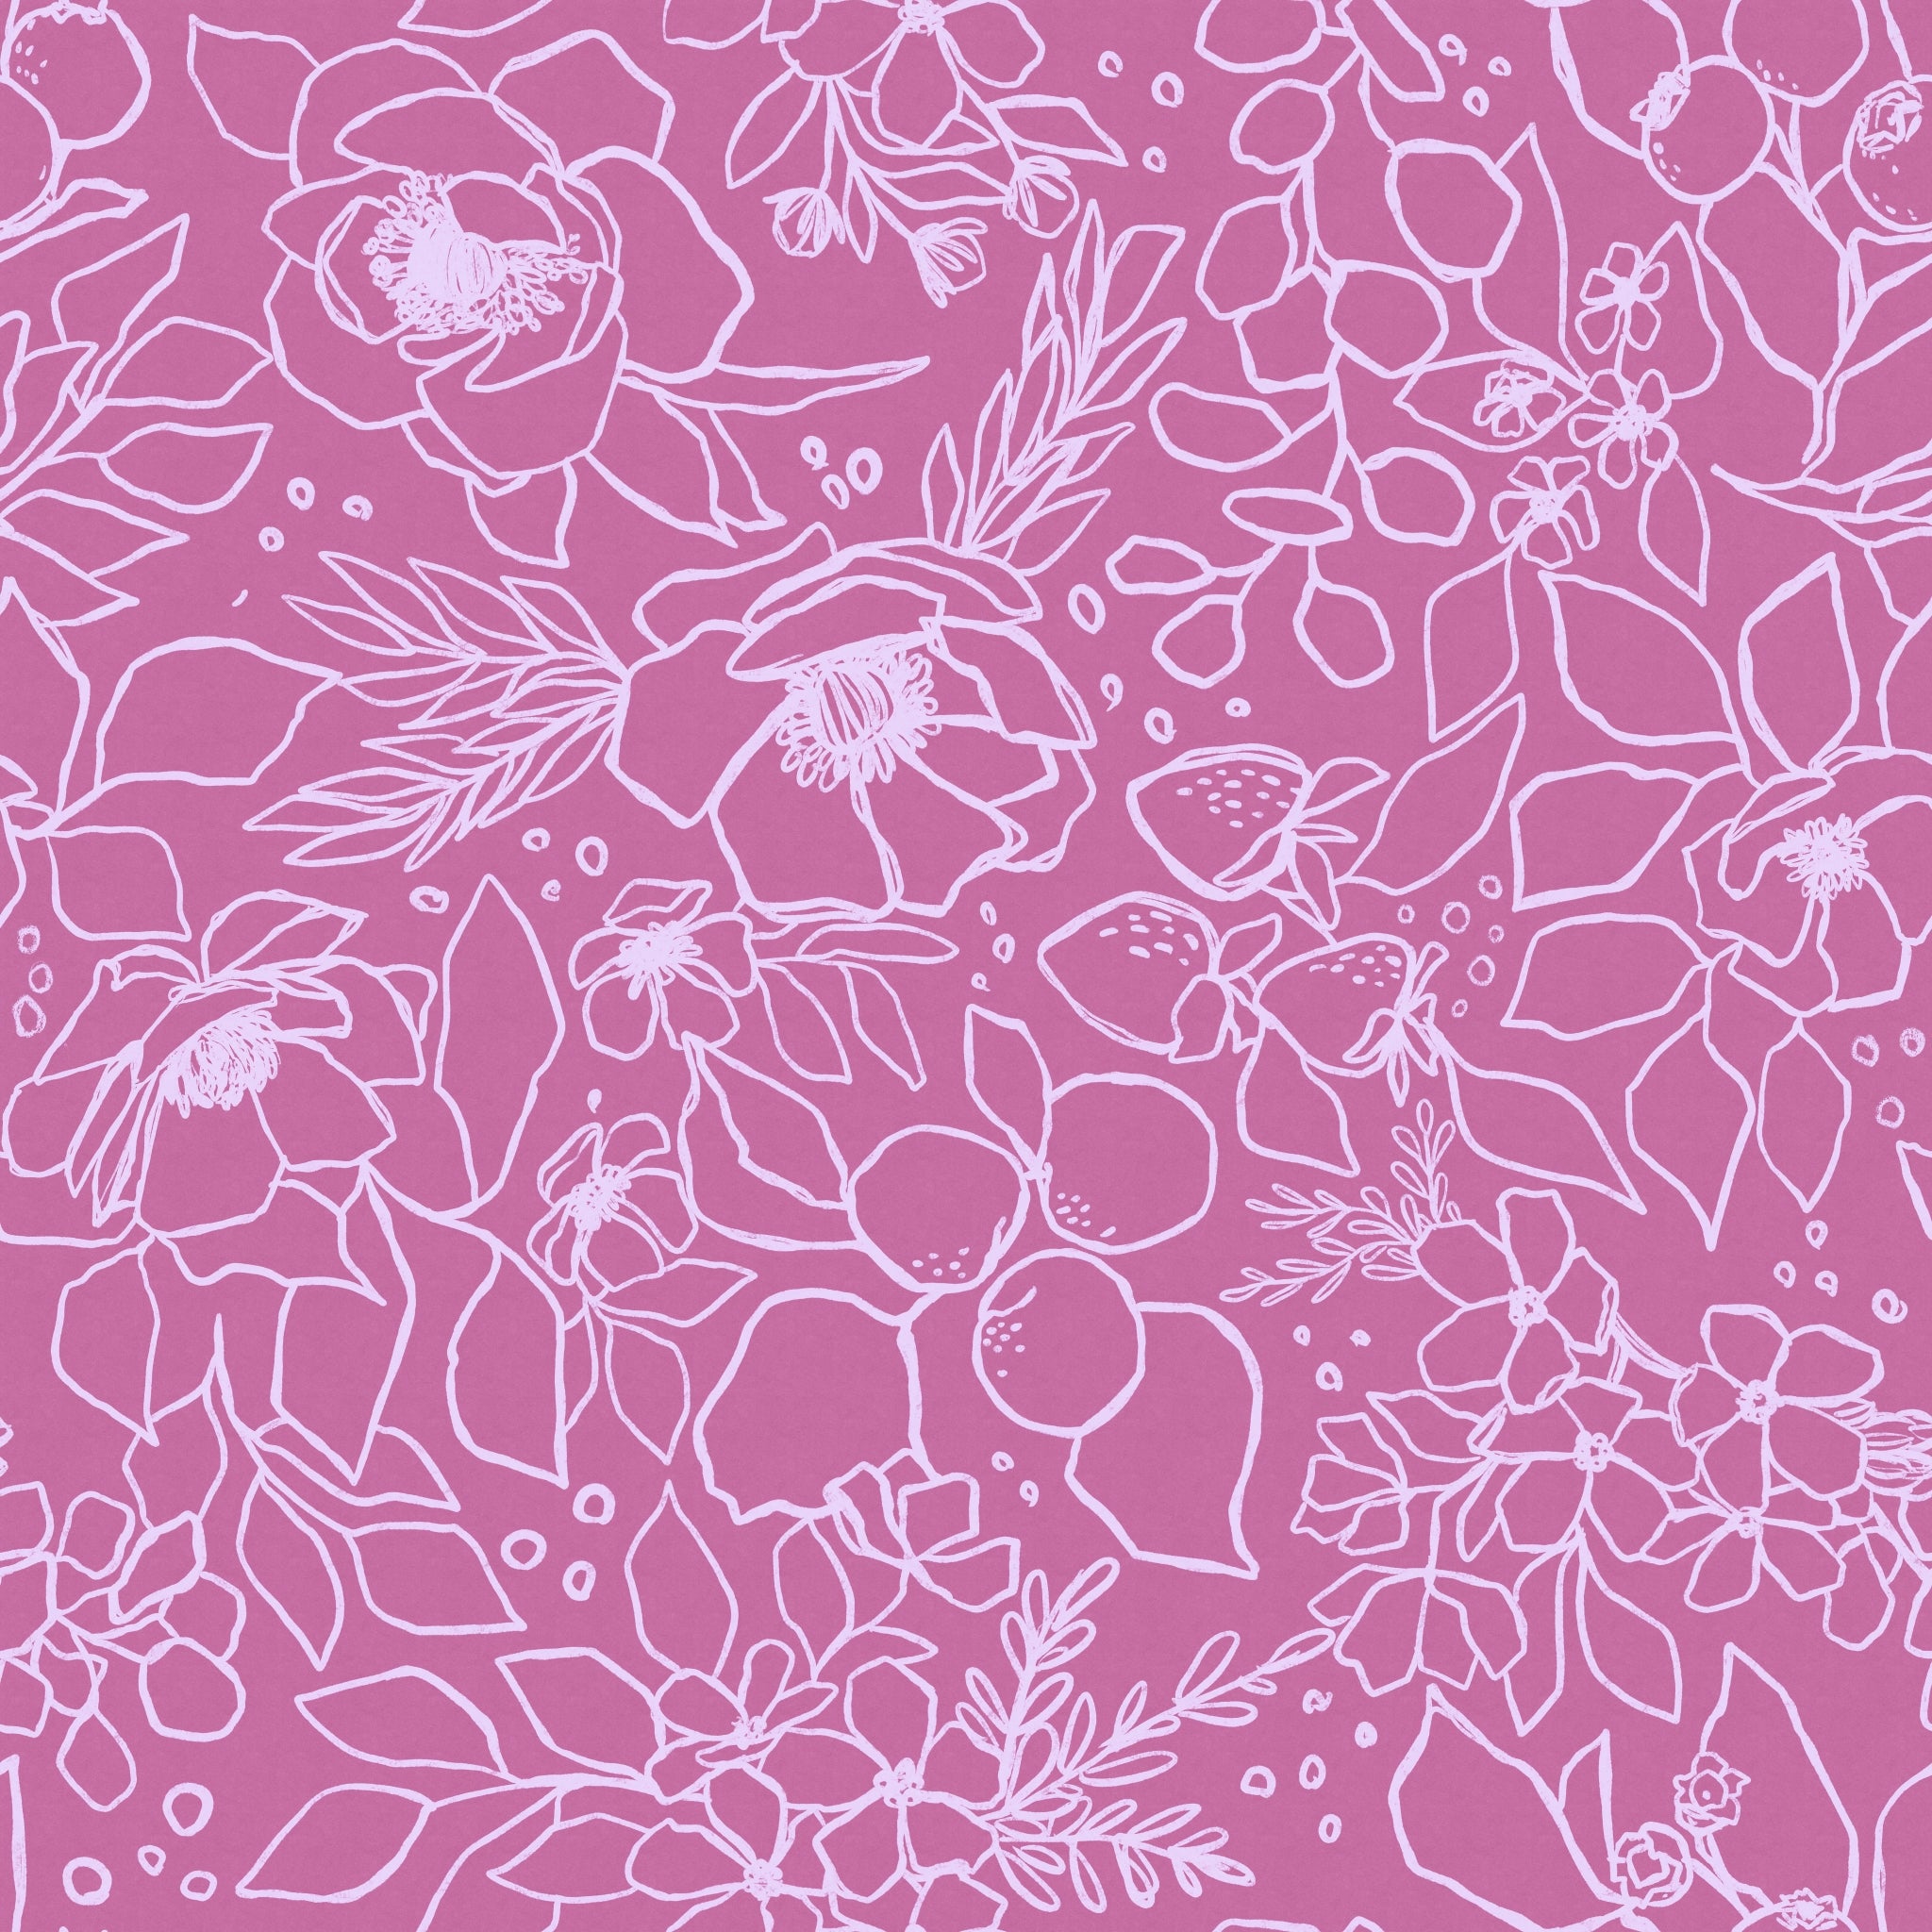 Wall Blush 'Paige (Pink) Wallpaper' in a cozy room, with a focus on floral patterns for chic interior decor.